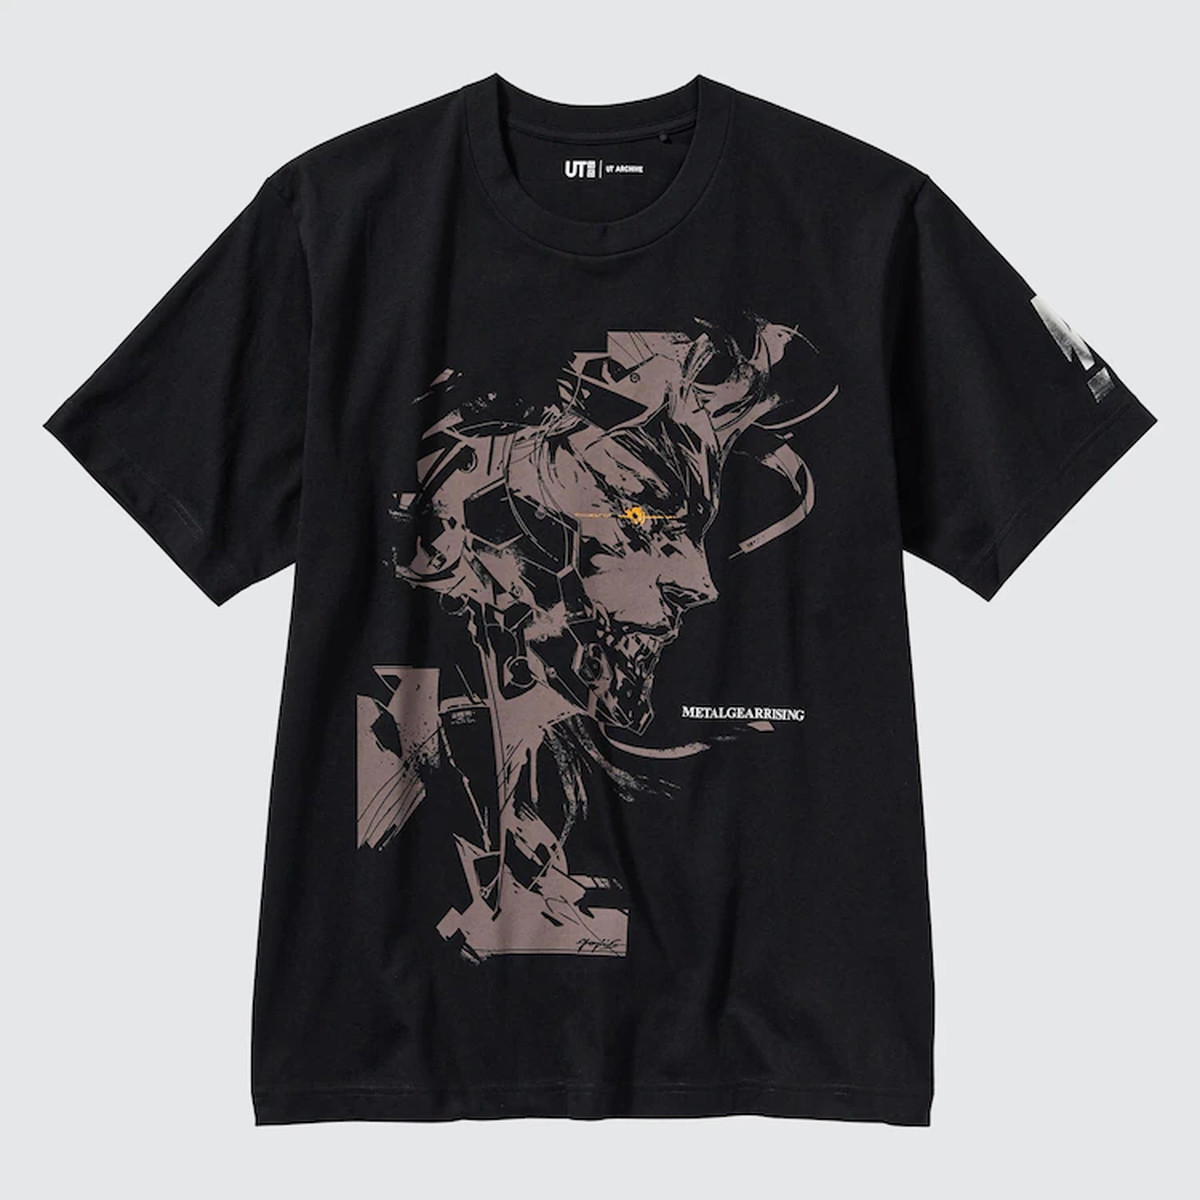 Uniqlo’s Metal Gear Solid T-shirts Return is a Christmas Blessing